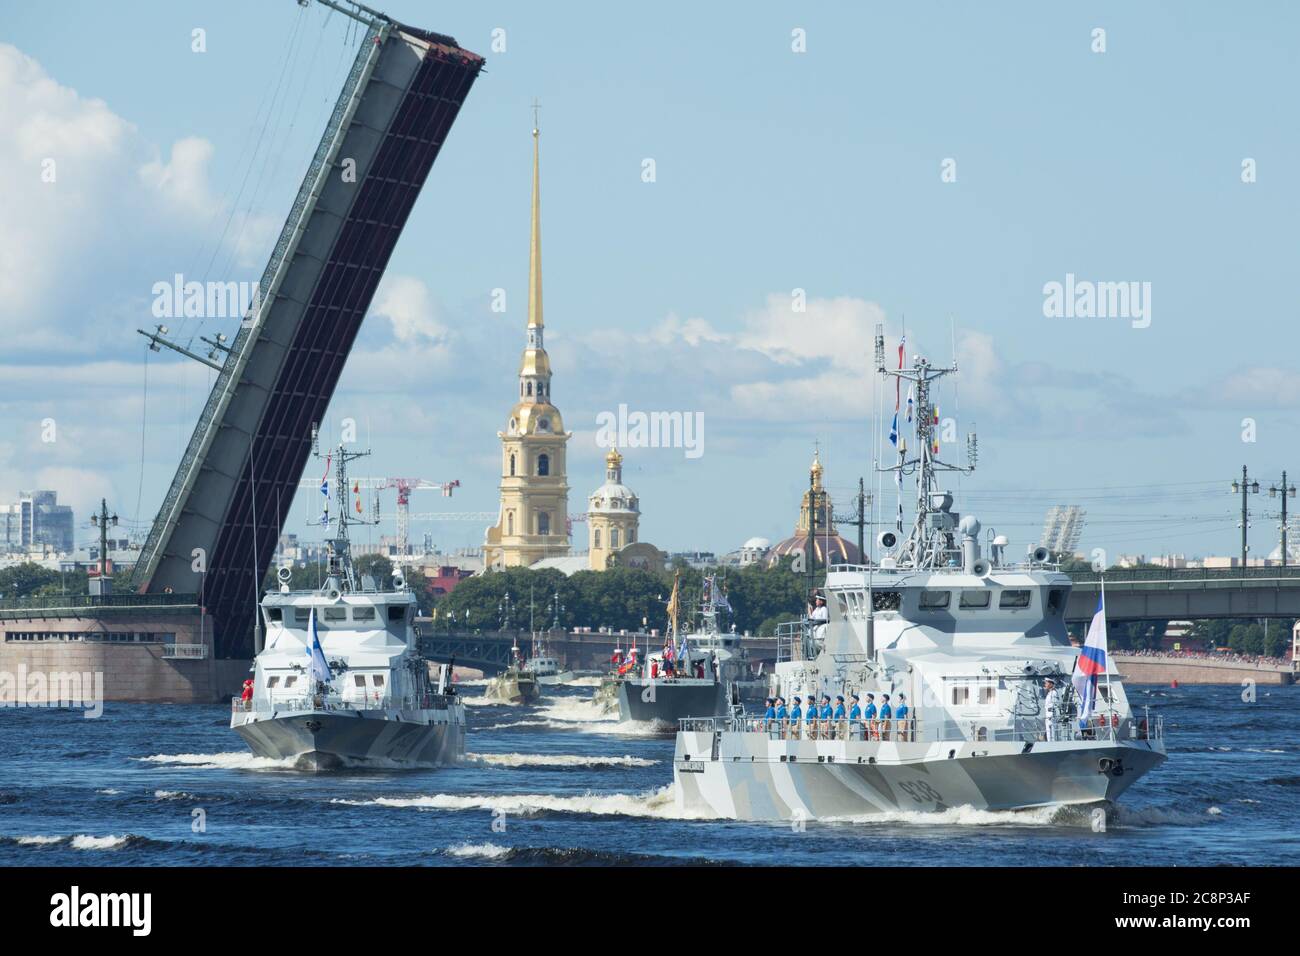 Moscow, Russia. 26th July, 2020. Russian navy ships sail during a military parade to celebrate Russian Navy Day in St. Petersburg, Russia, July 26, 2020. The naval parade in St. Petersburg involved 46 ships and submarines, more than 40 planes and helicopters, and over 4,000 servicemen. Smaller celebrations were held in the country's other fleet bases. Russia marks its Navy Day annually on the last Sunday of July. Credit: Irina Motina/Xinhua/Alamy Live News Stock Photo